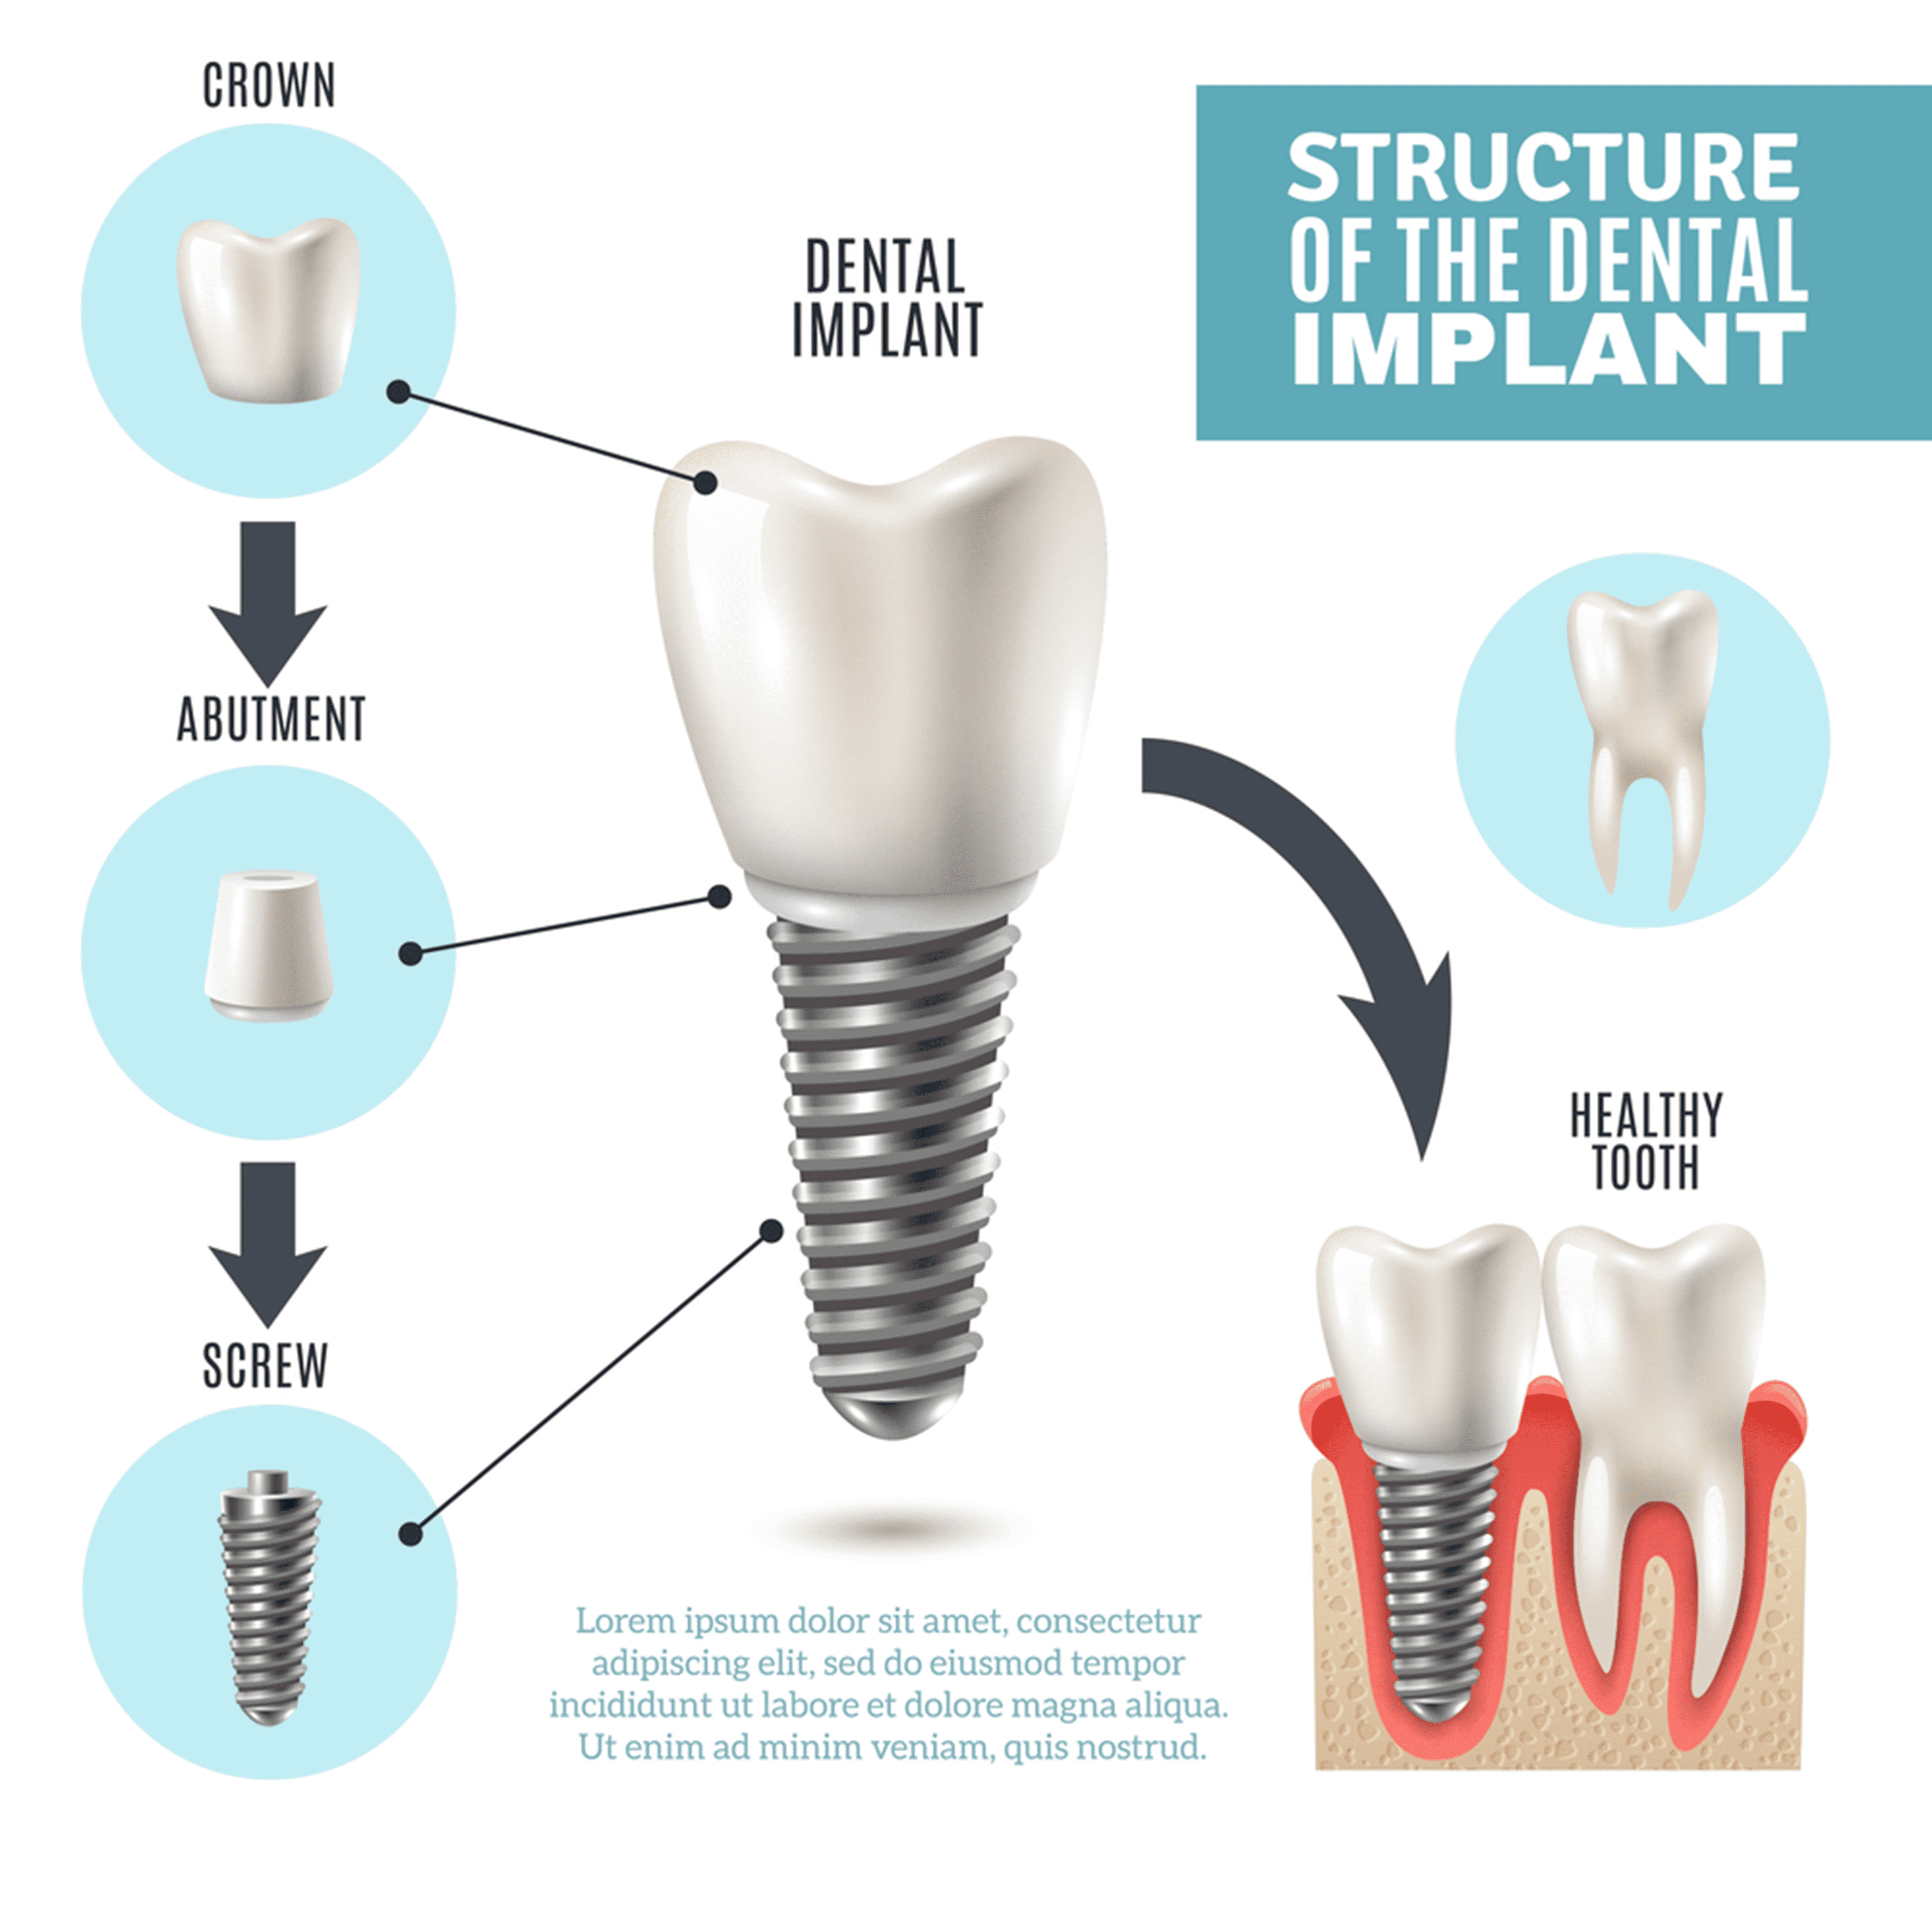 care follow up and maintenance after implants